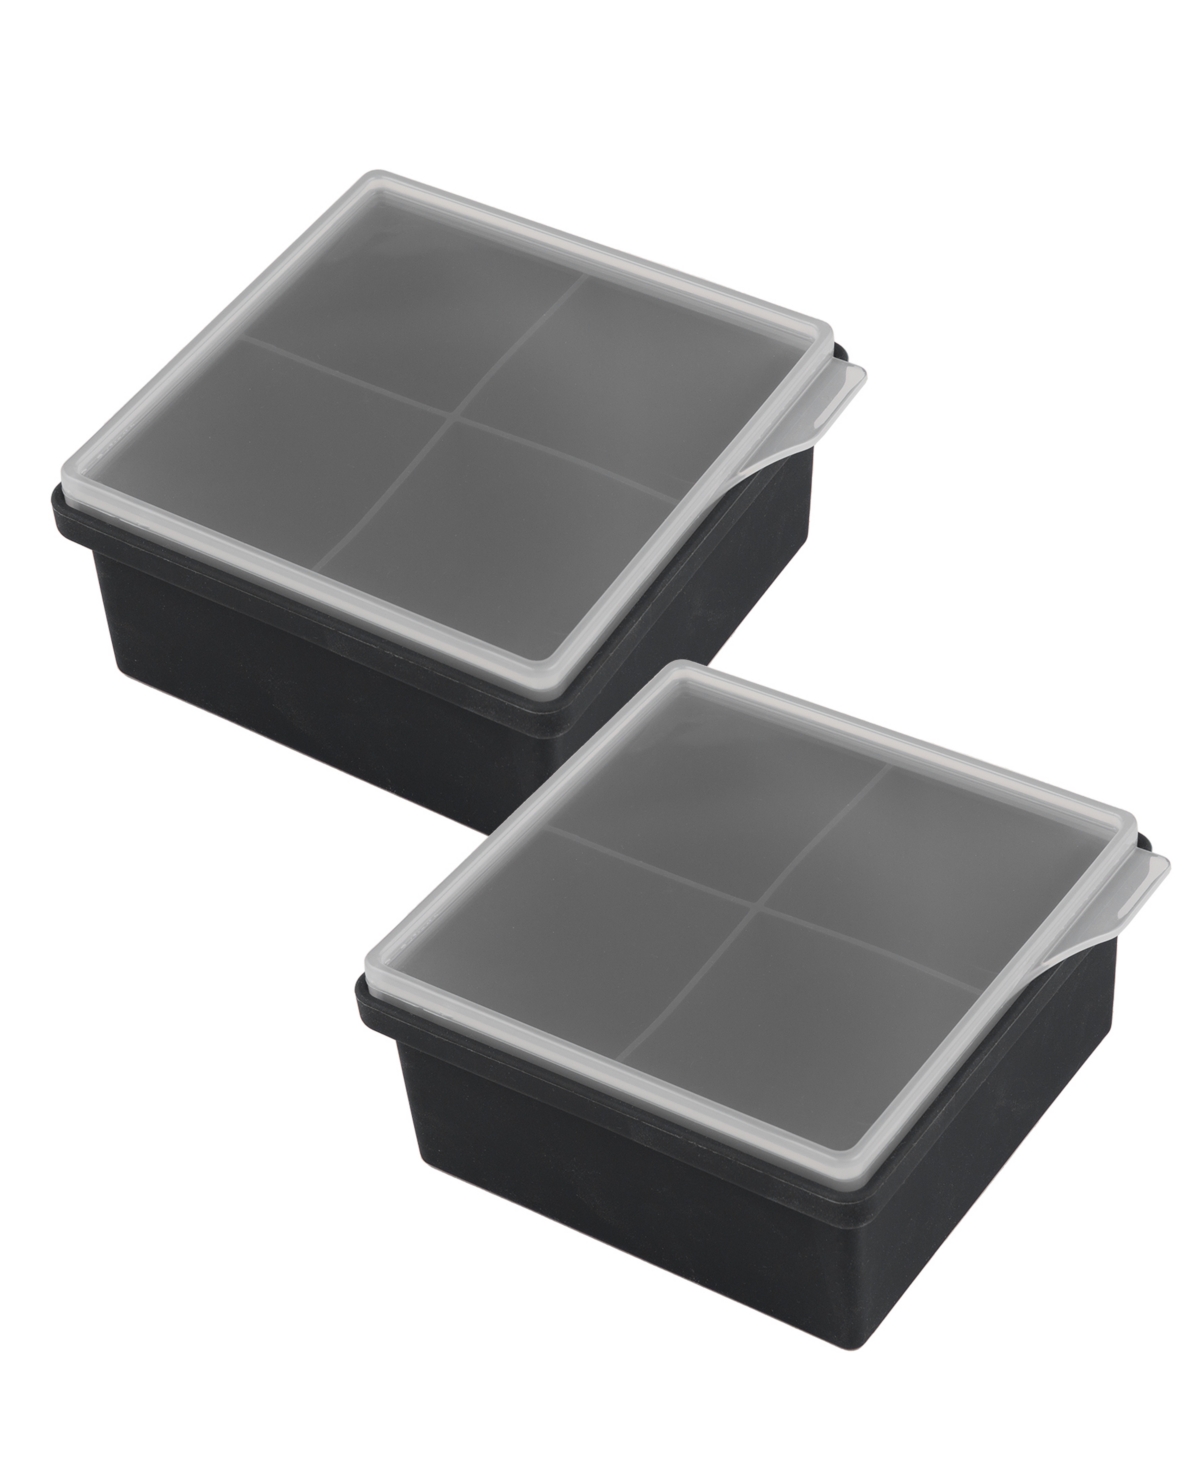 Cambridge 4 Cube Silicone Ice Molds, Set Of 2 In Black